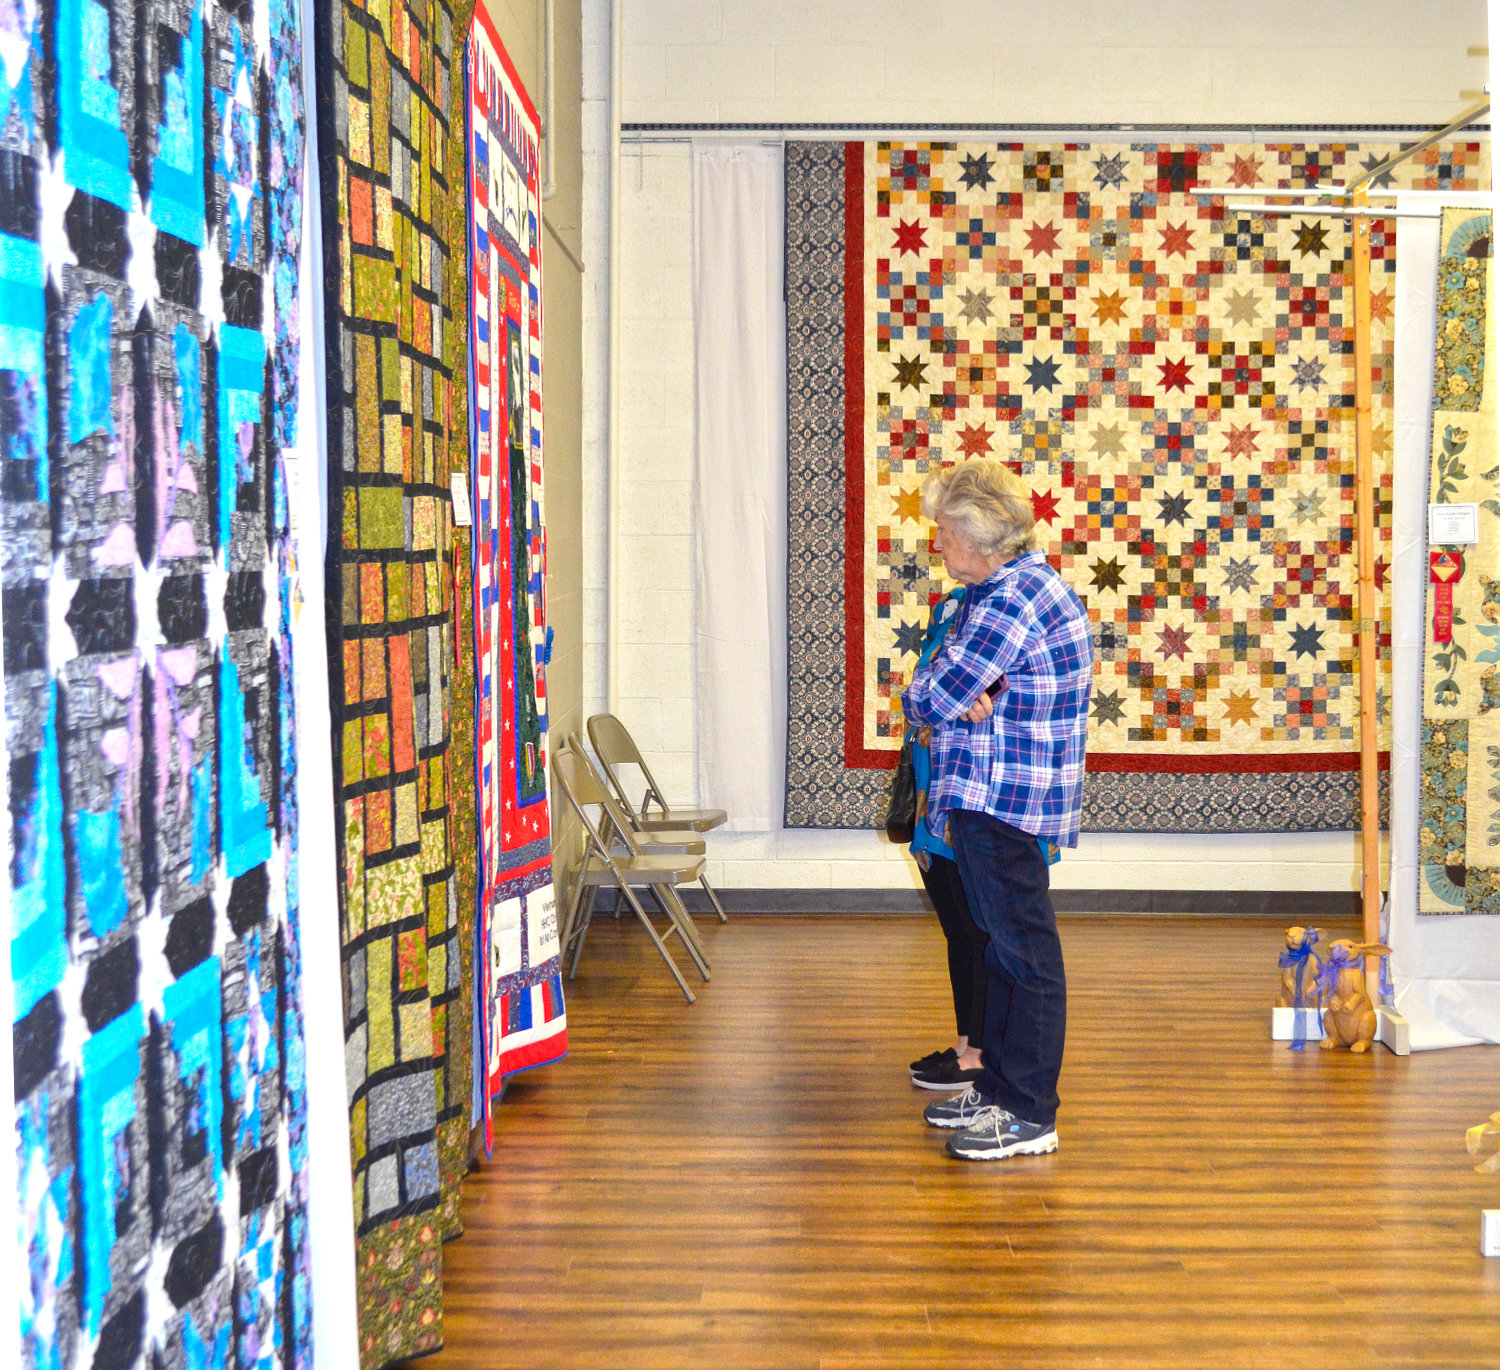 Numerous entries were available for viewing during the annual Mineola League of the Arts quilt show last week.